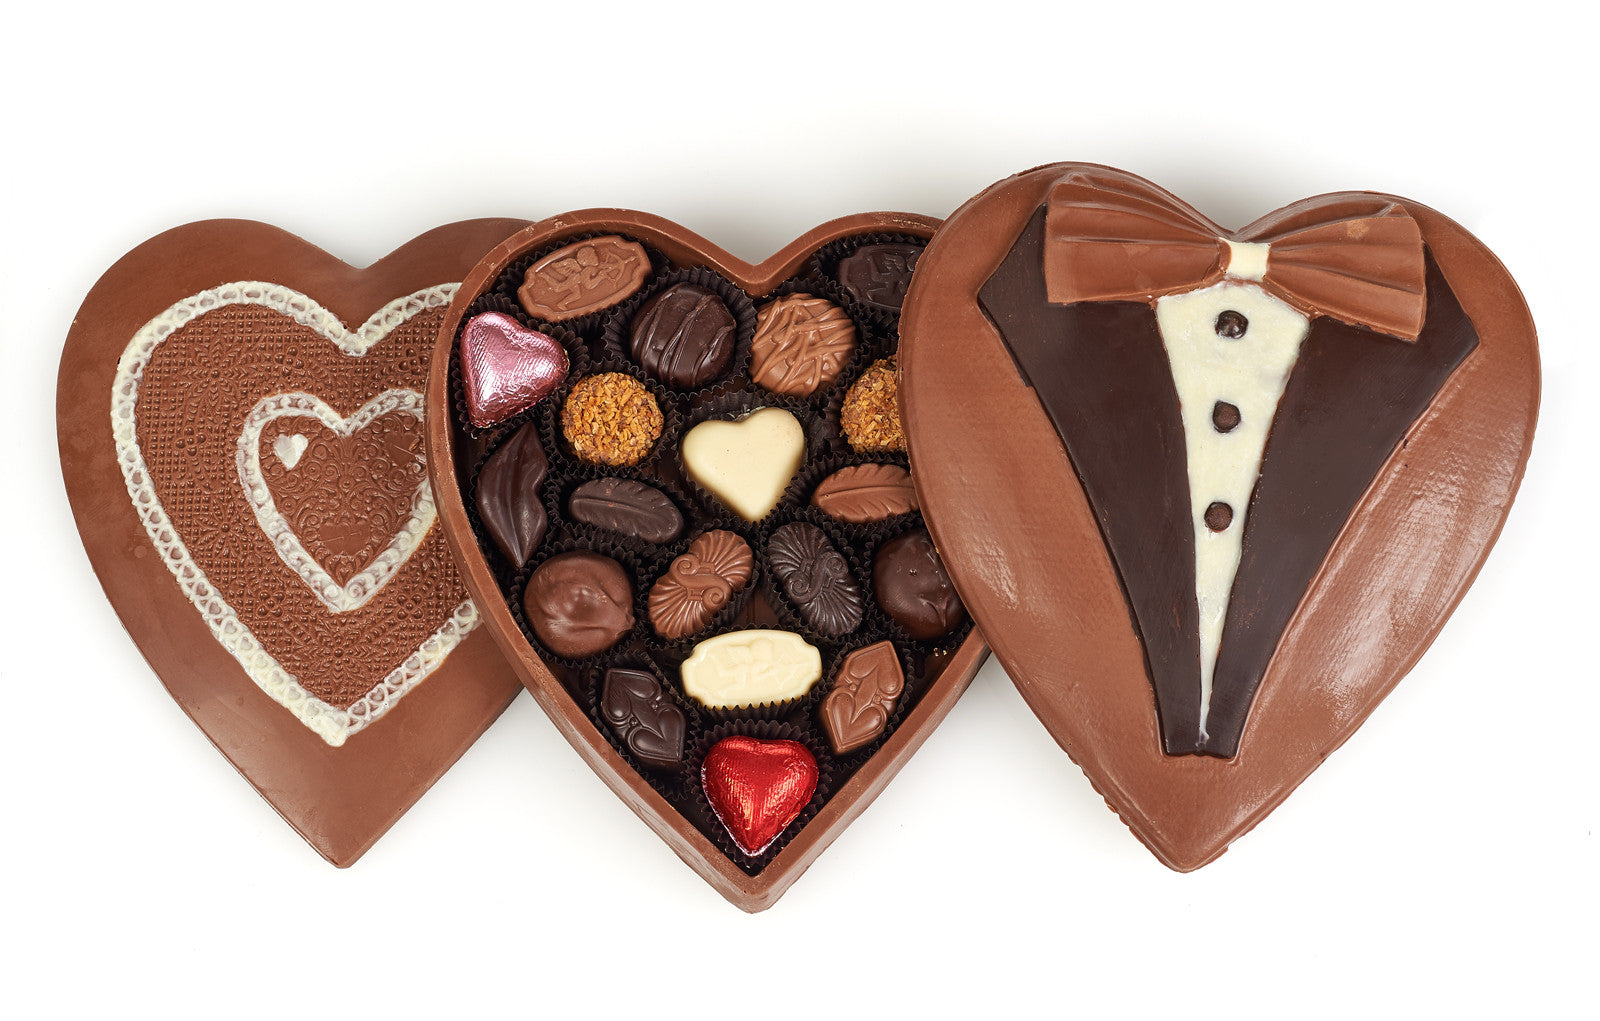 Get your heart-shaped candy box this Valentine's Day